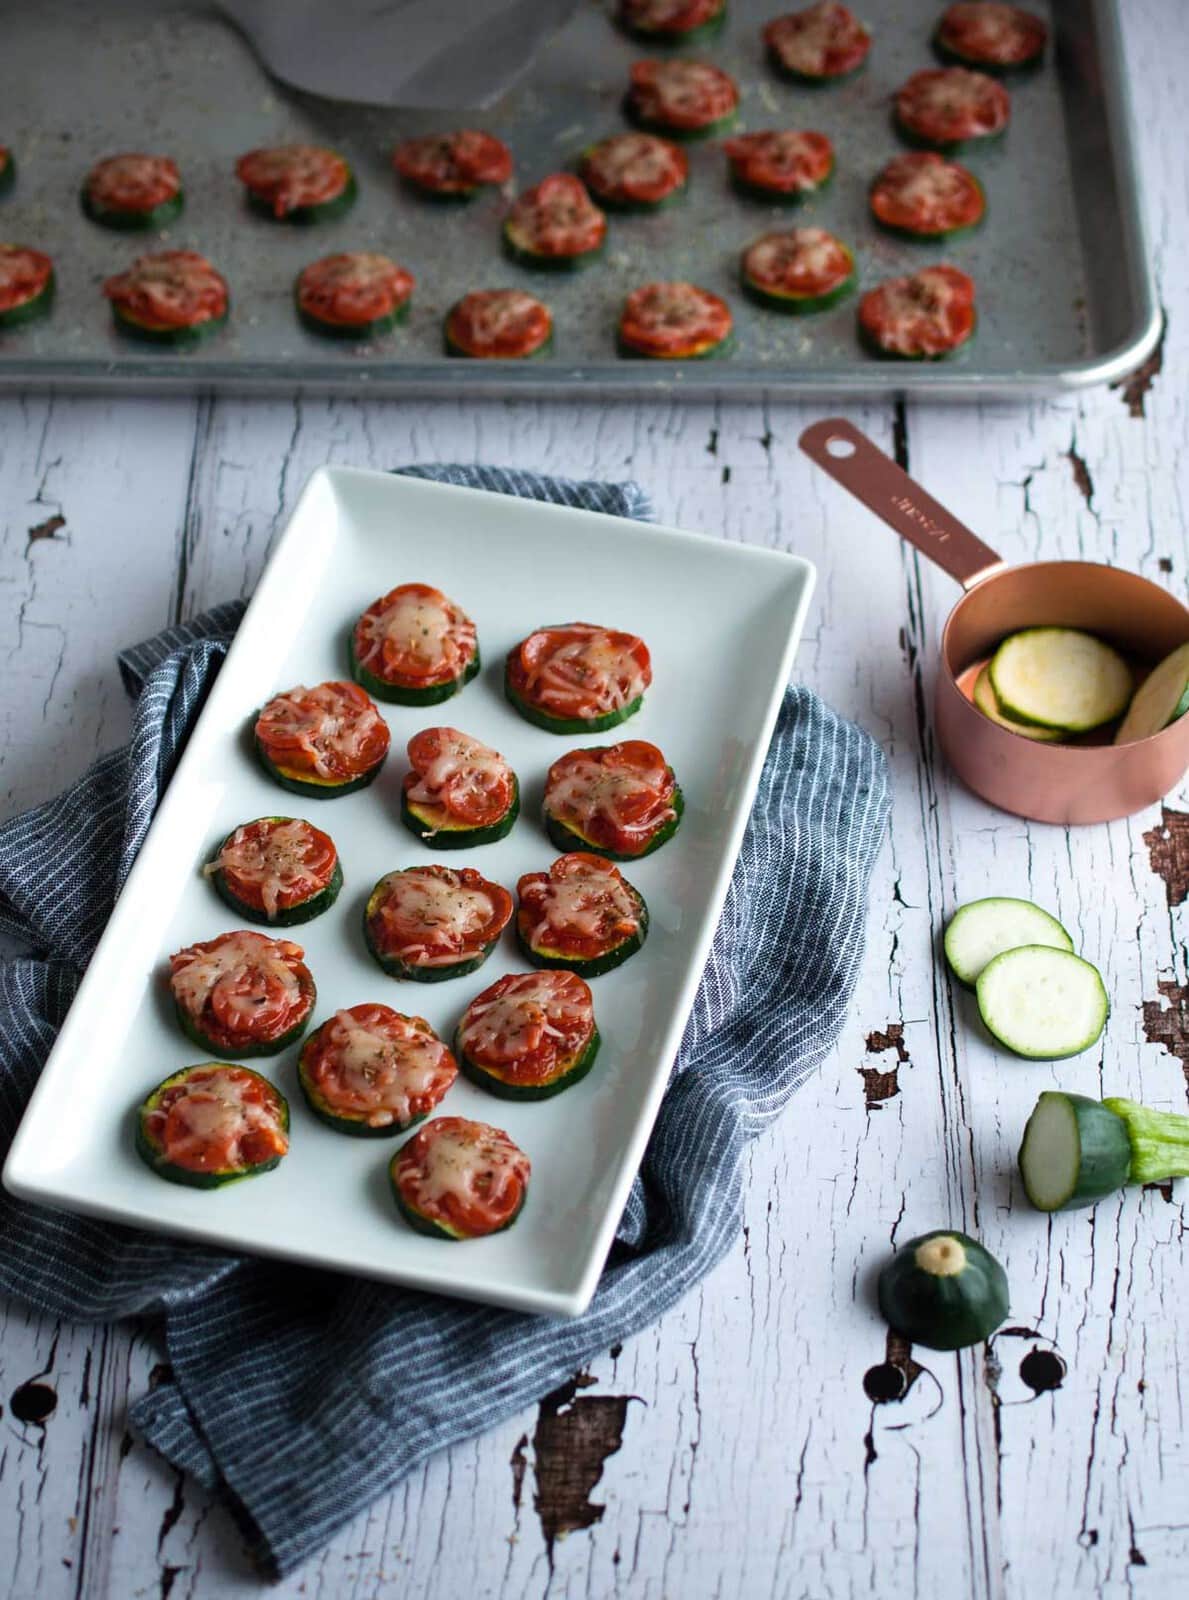 Zucchini pizza bites are the perfect snack for game day or any other time you need a healthy appetizer that is simple and easy to make, but full of flavor.